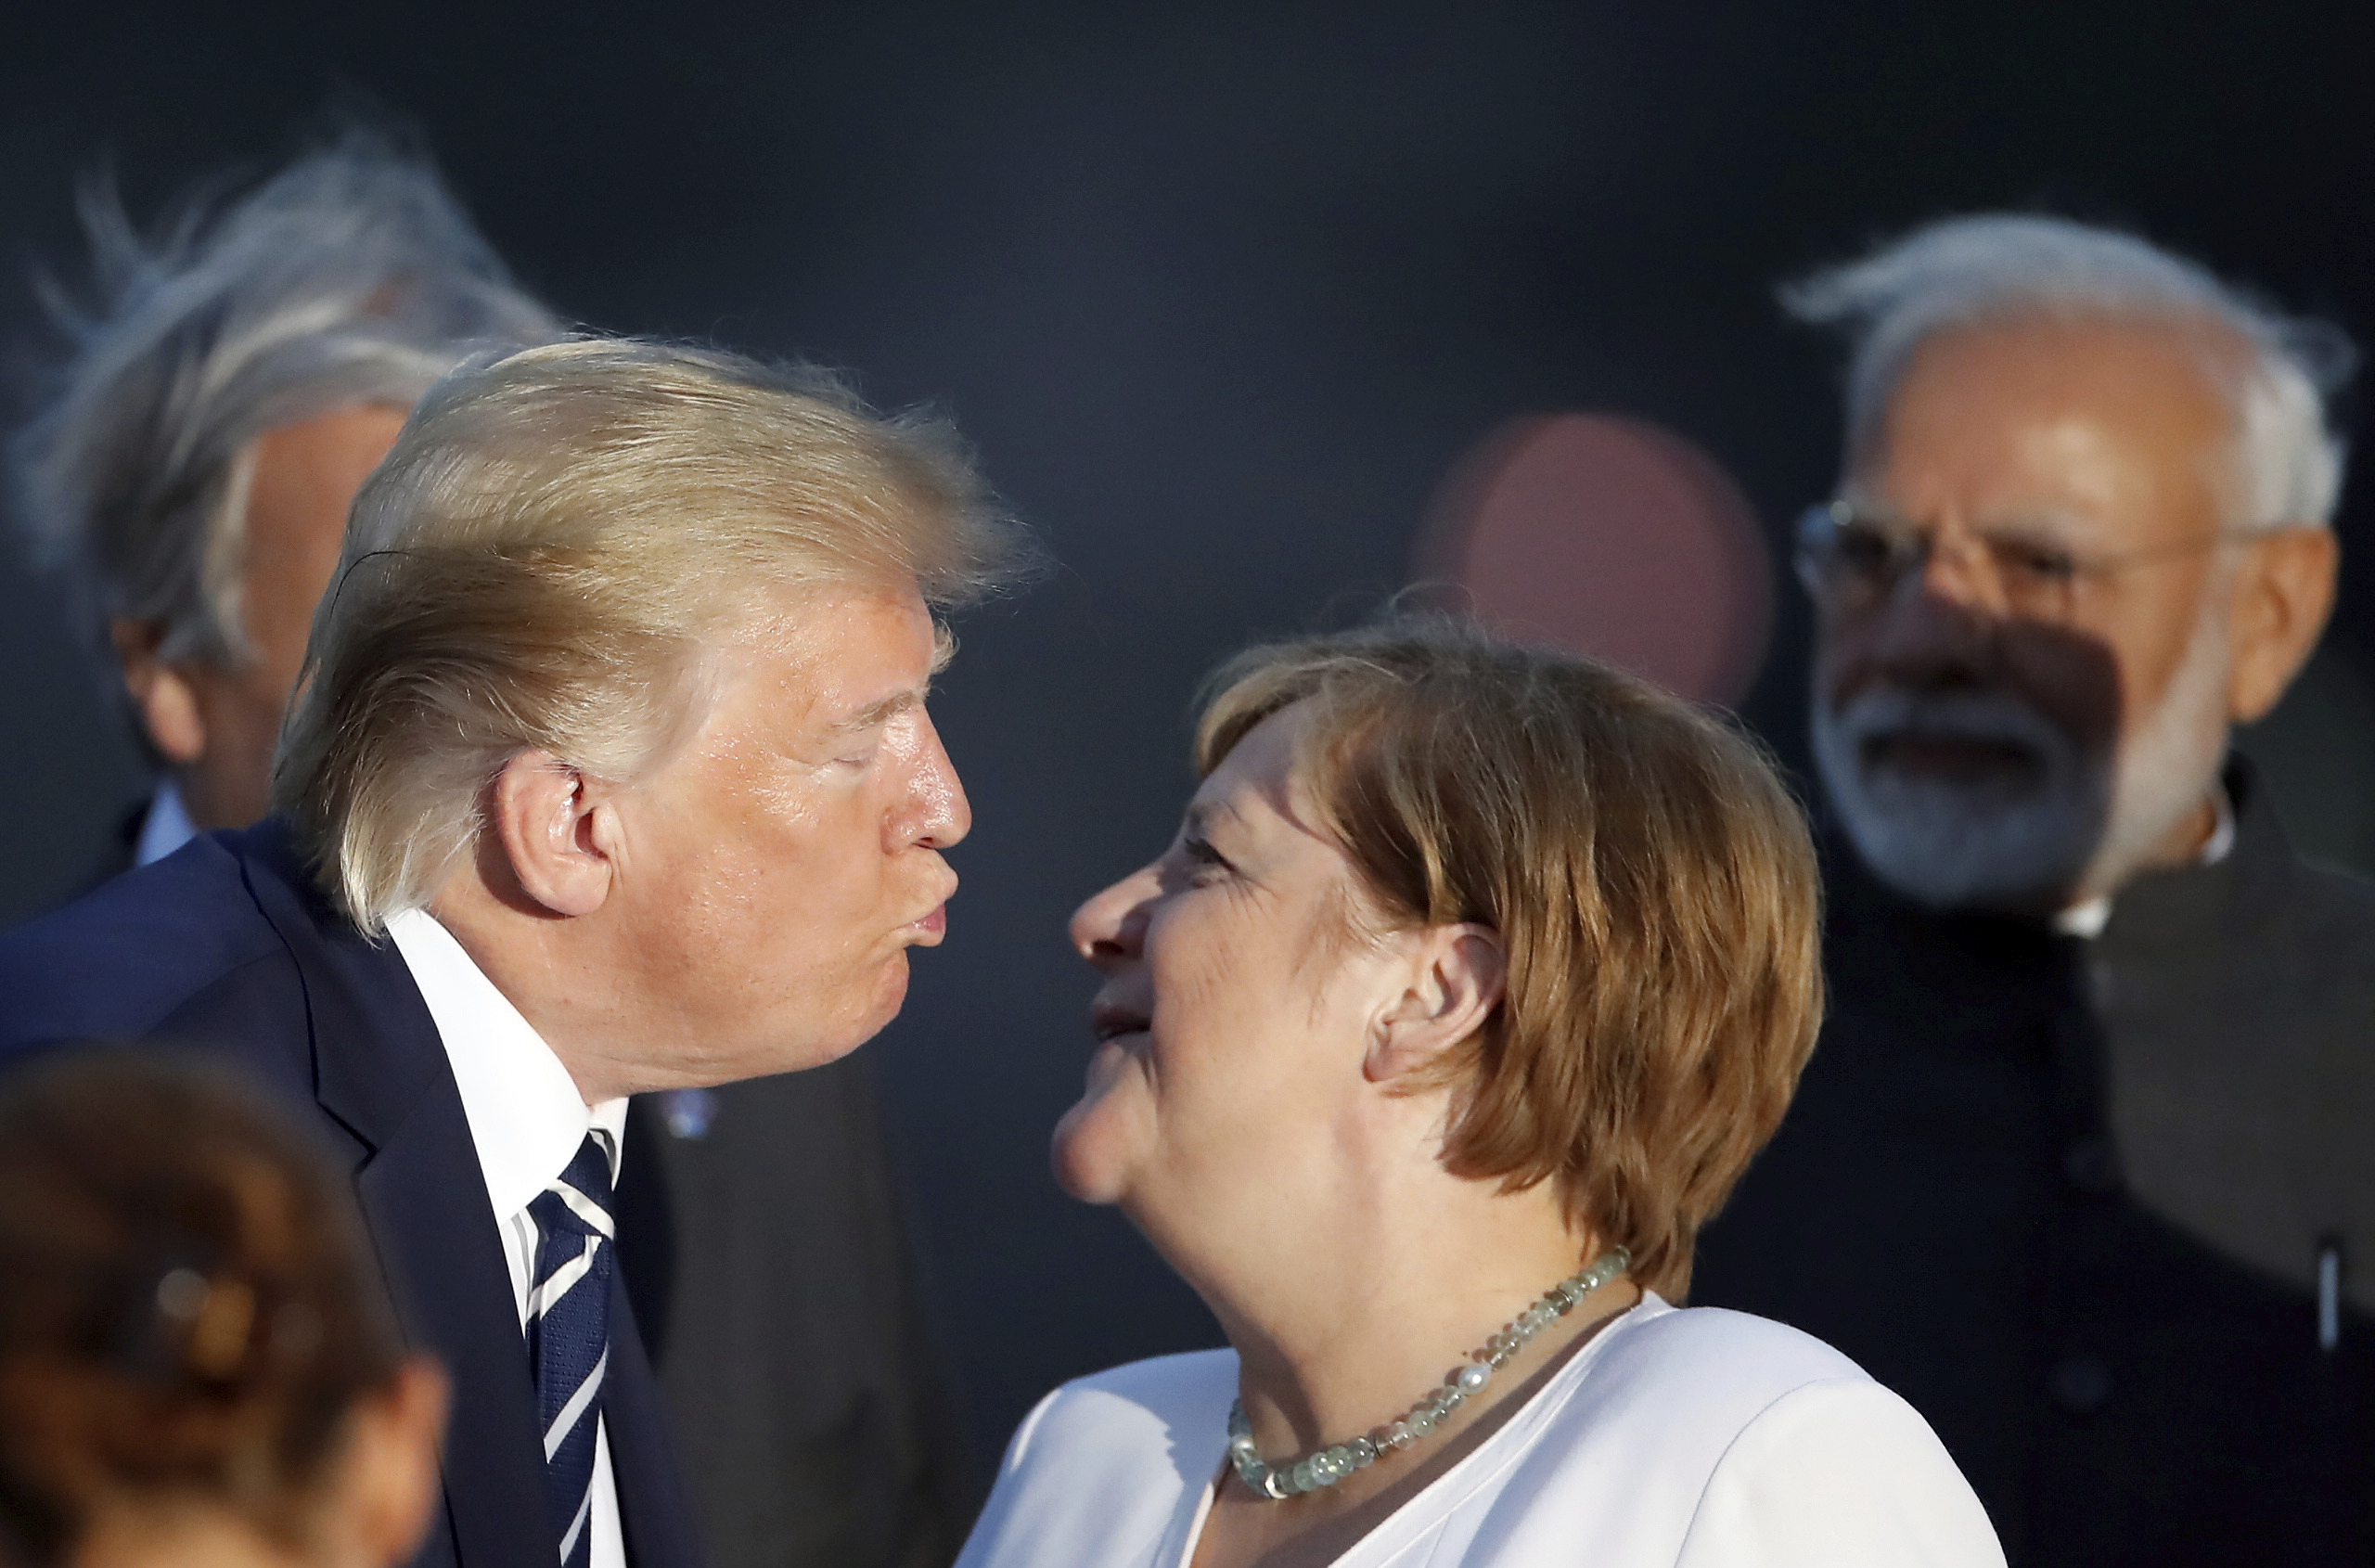 President Donald Trump kisses German Chancellor Angela Merkel during the G7 family photo Sunday, Aug. 25, 2019 in Biarritz. A top Iranian official paid an unannounced visit Sunday to the G-7 summit and headed straight to the buildings where leaders of the world's major democracies have been debating how to handle the country's nuclear ambitions. (Christian Hartmann, Pool via AP)